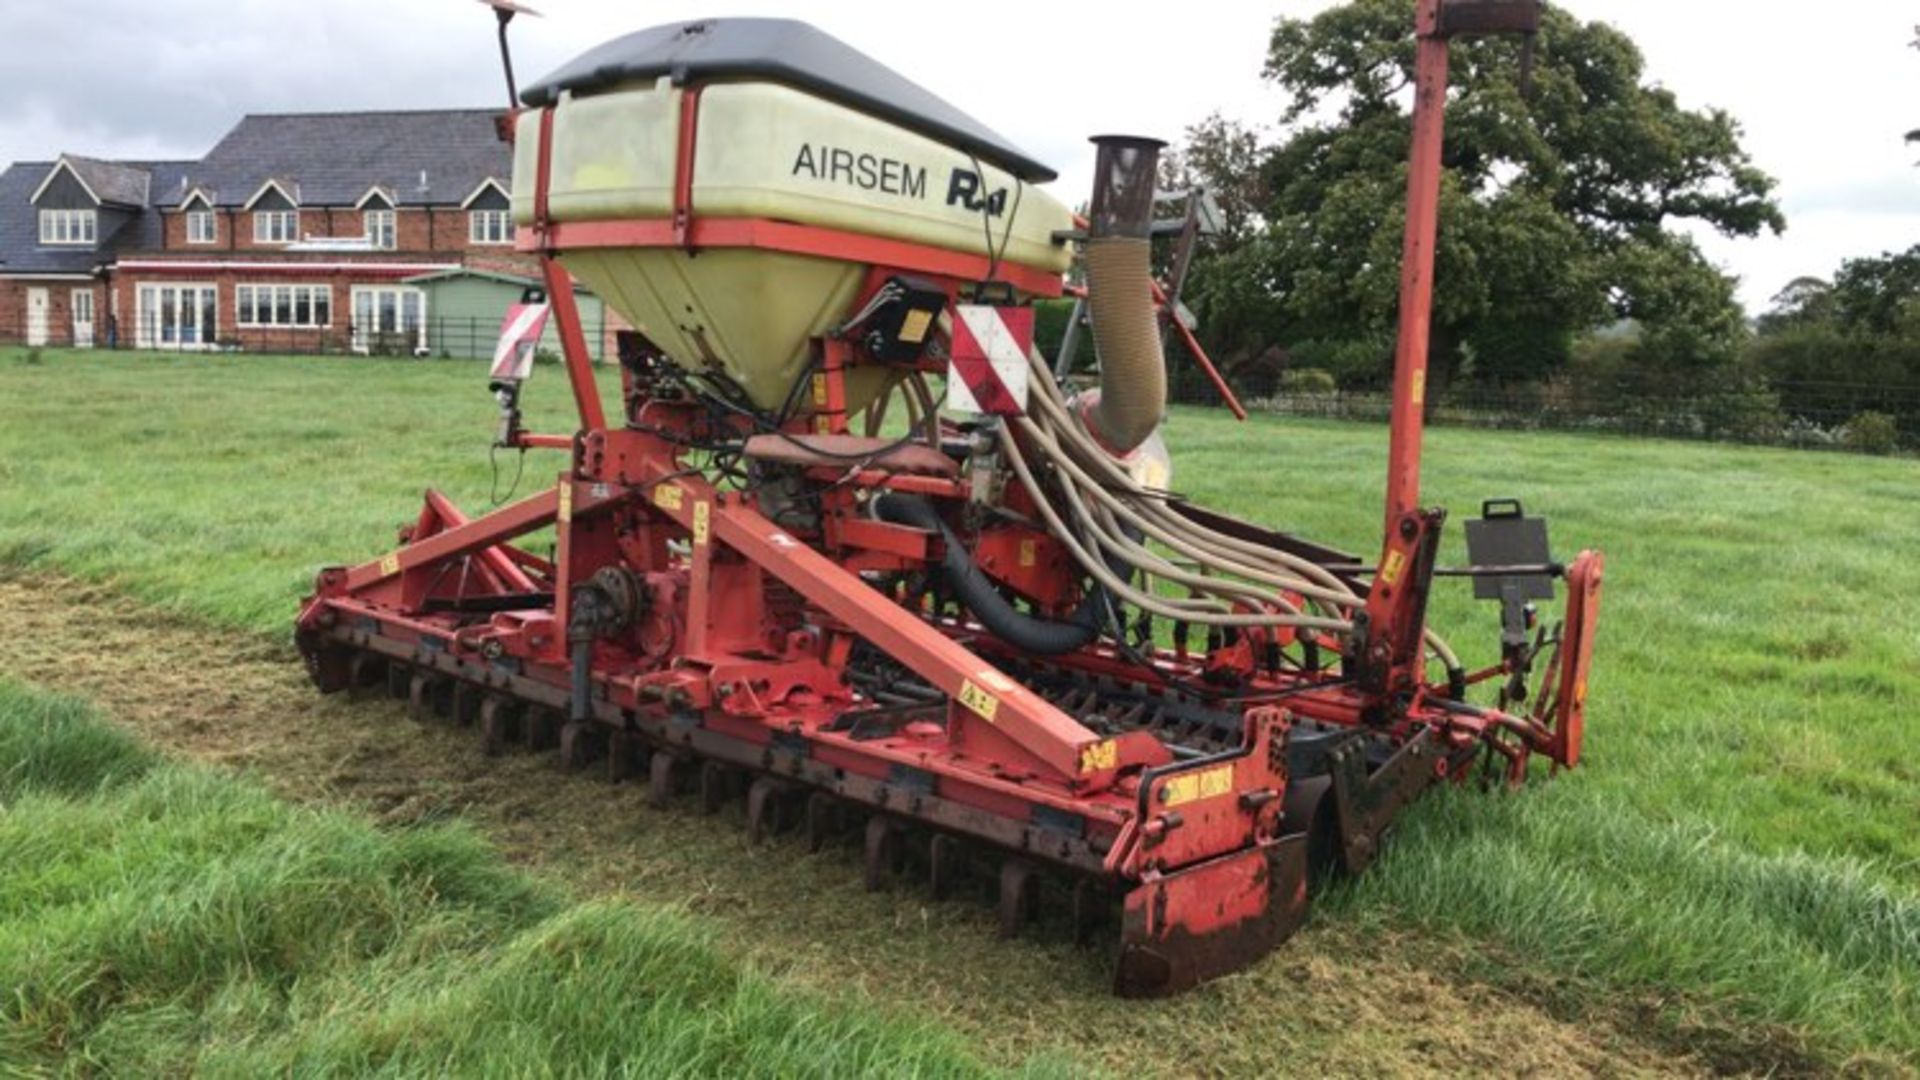 4m Combination Drill 1999, Vicon Power Harrow- working order. Rau Drill-spares or repairs as